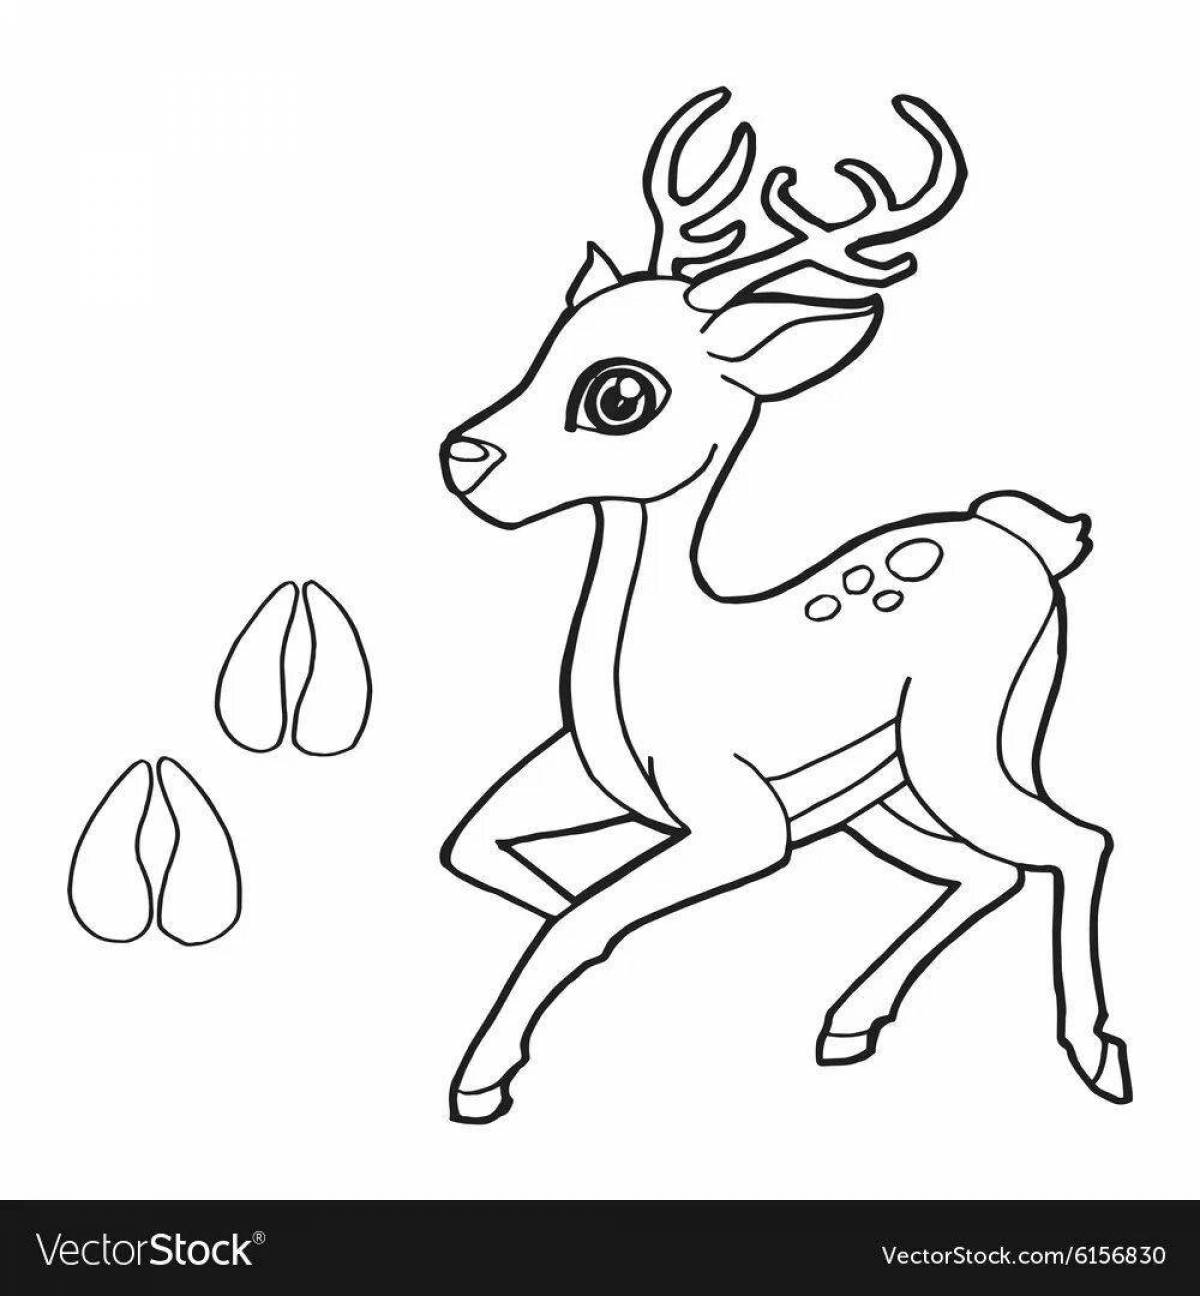 Serendipitous silver hoof coloring page